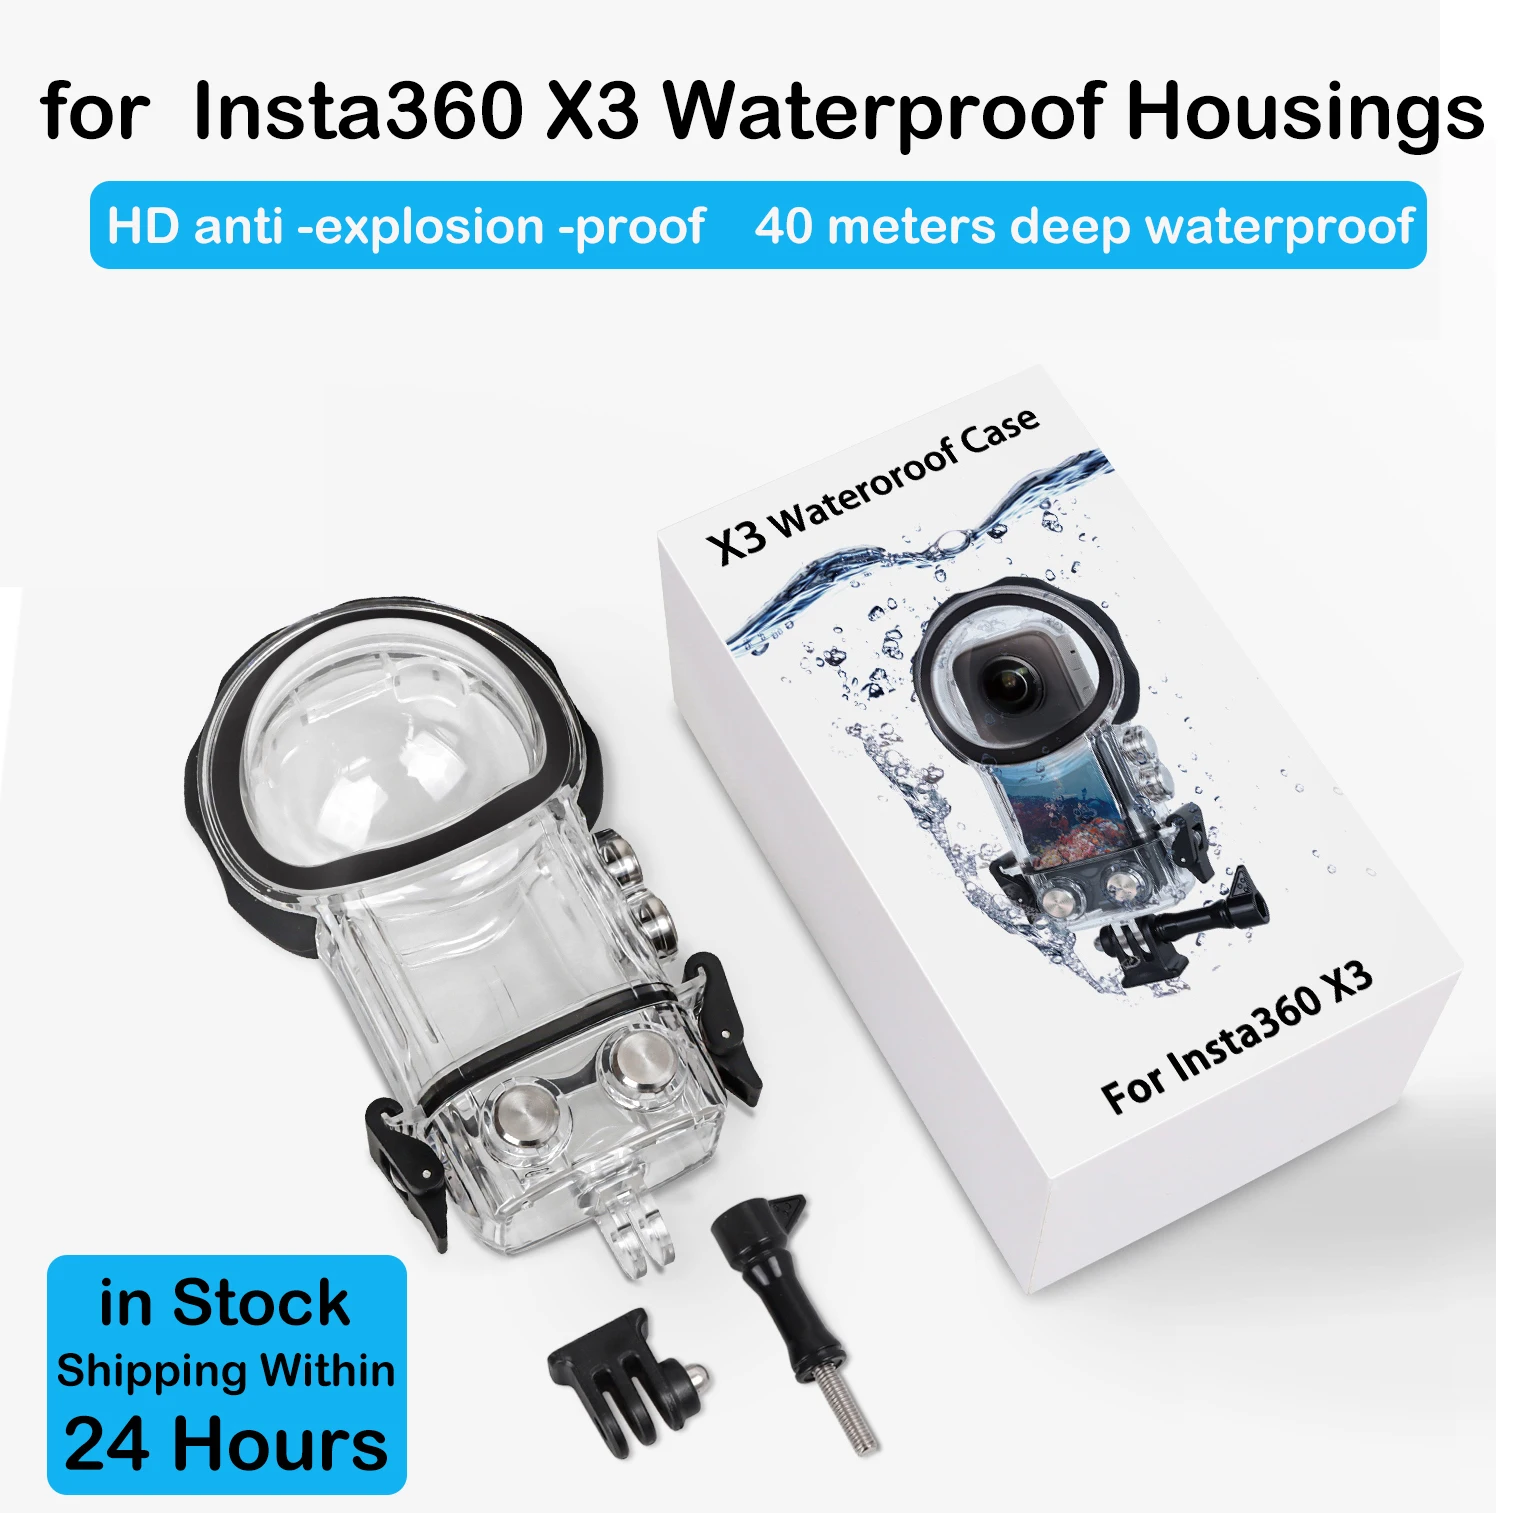 for Insta360 X3 360° Video Camera 40m Waterproof Housings Sealing Submersible Shell Protect Action Camera Accessory New in Stock enlarge